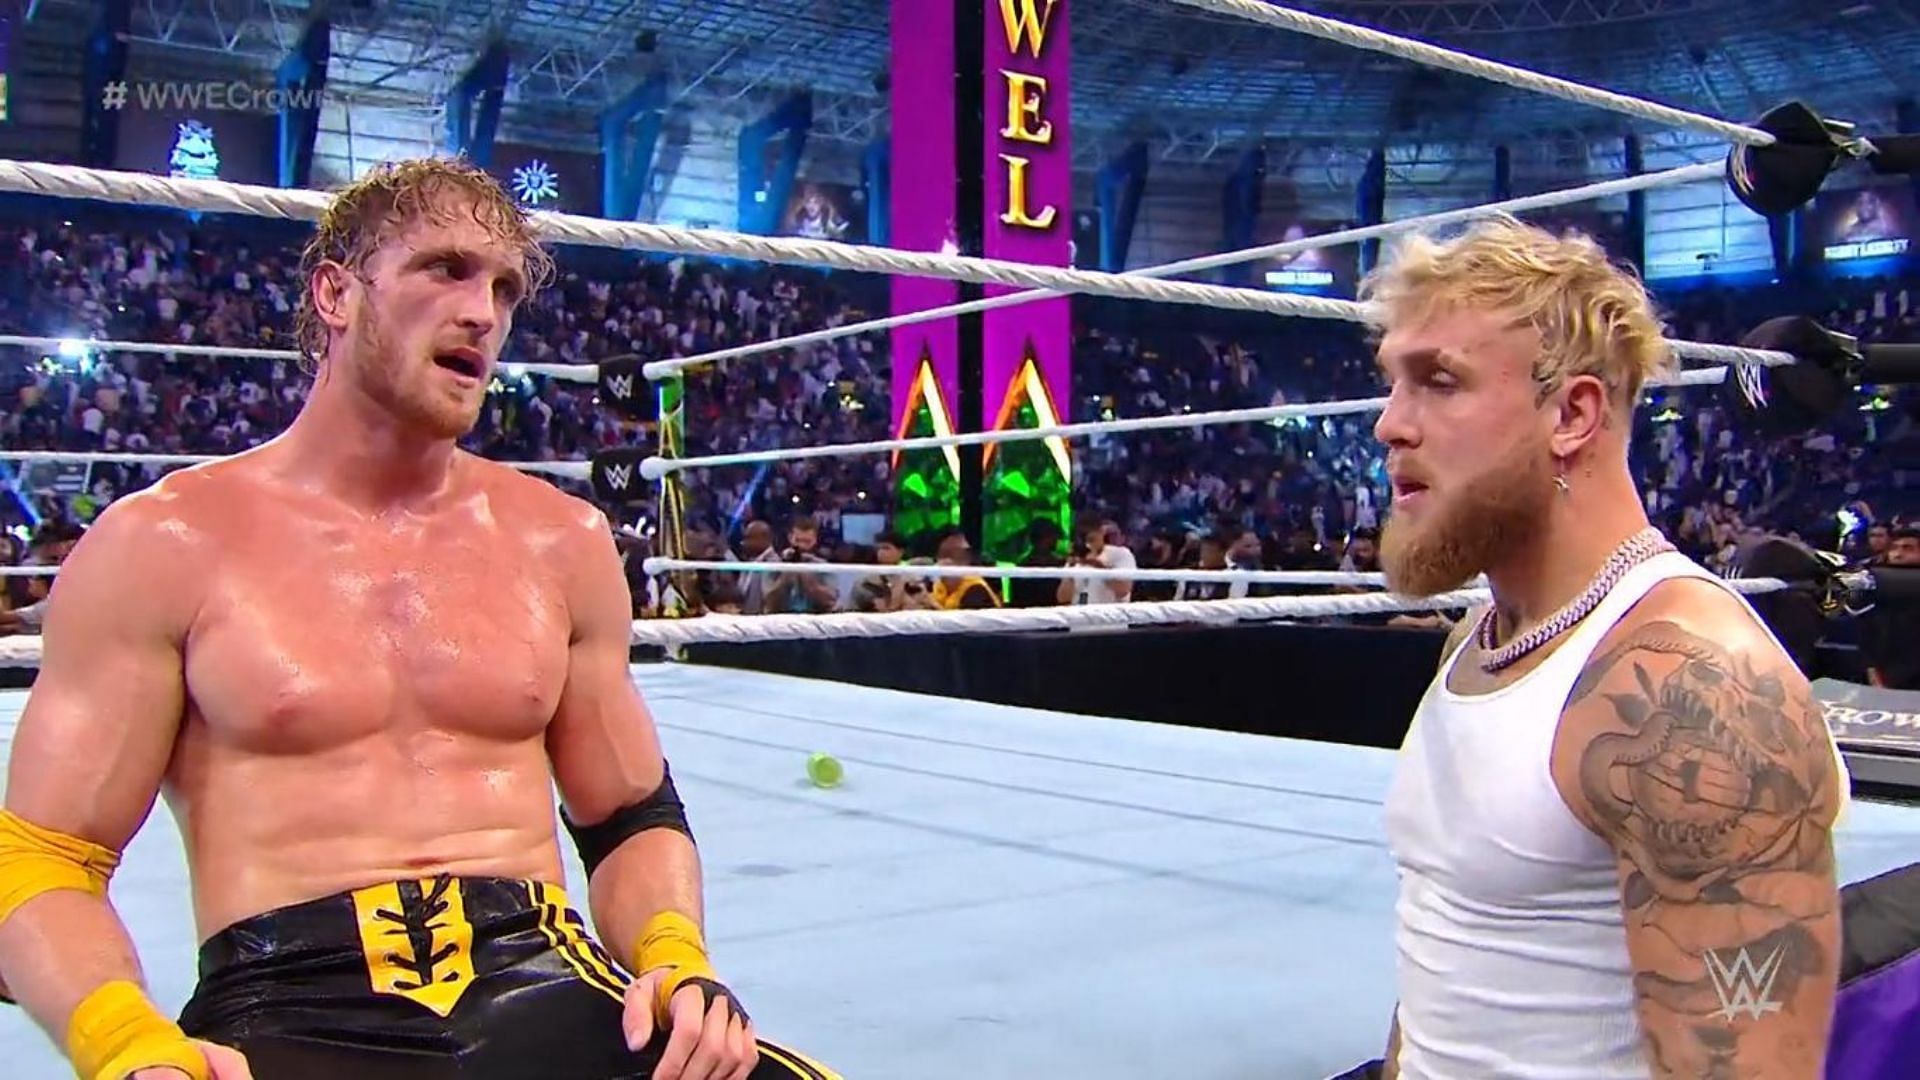 Jake Paul got heavily involved during the Crown Jewel main event